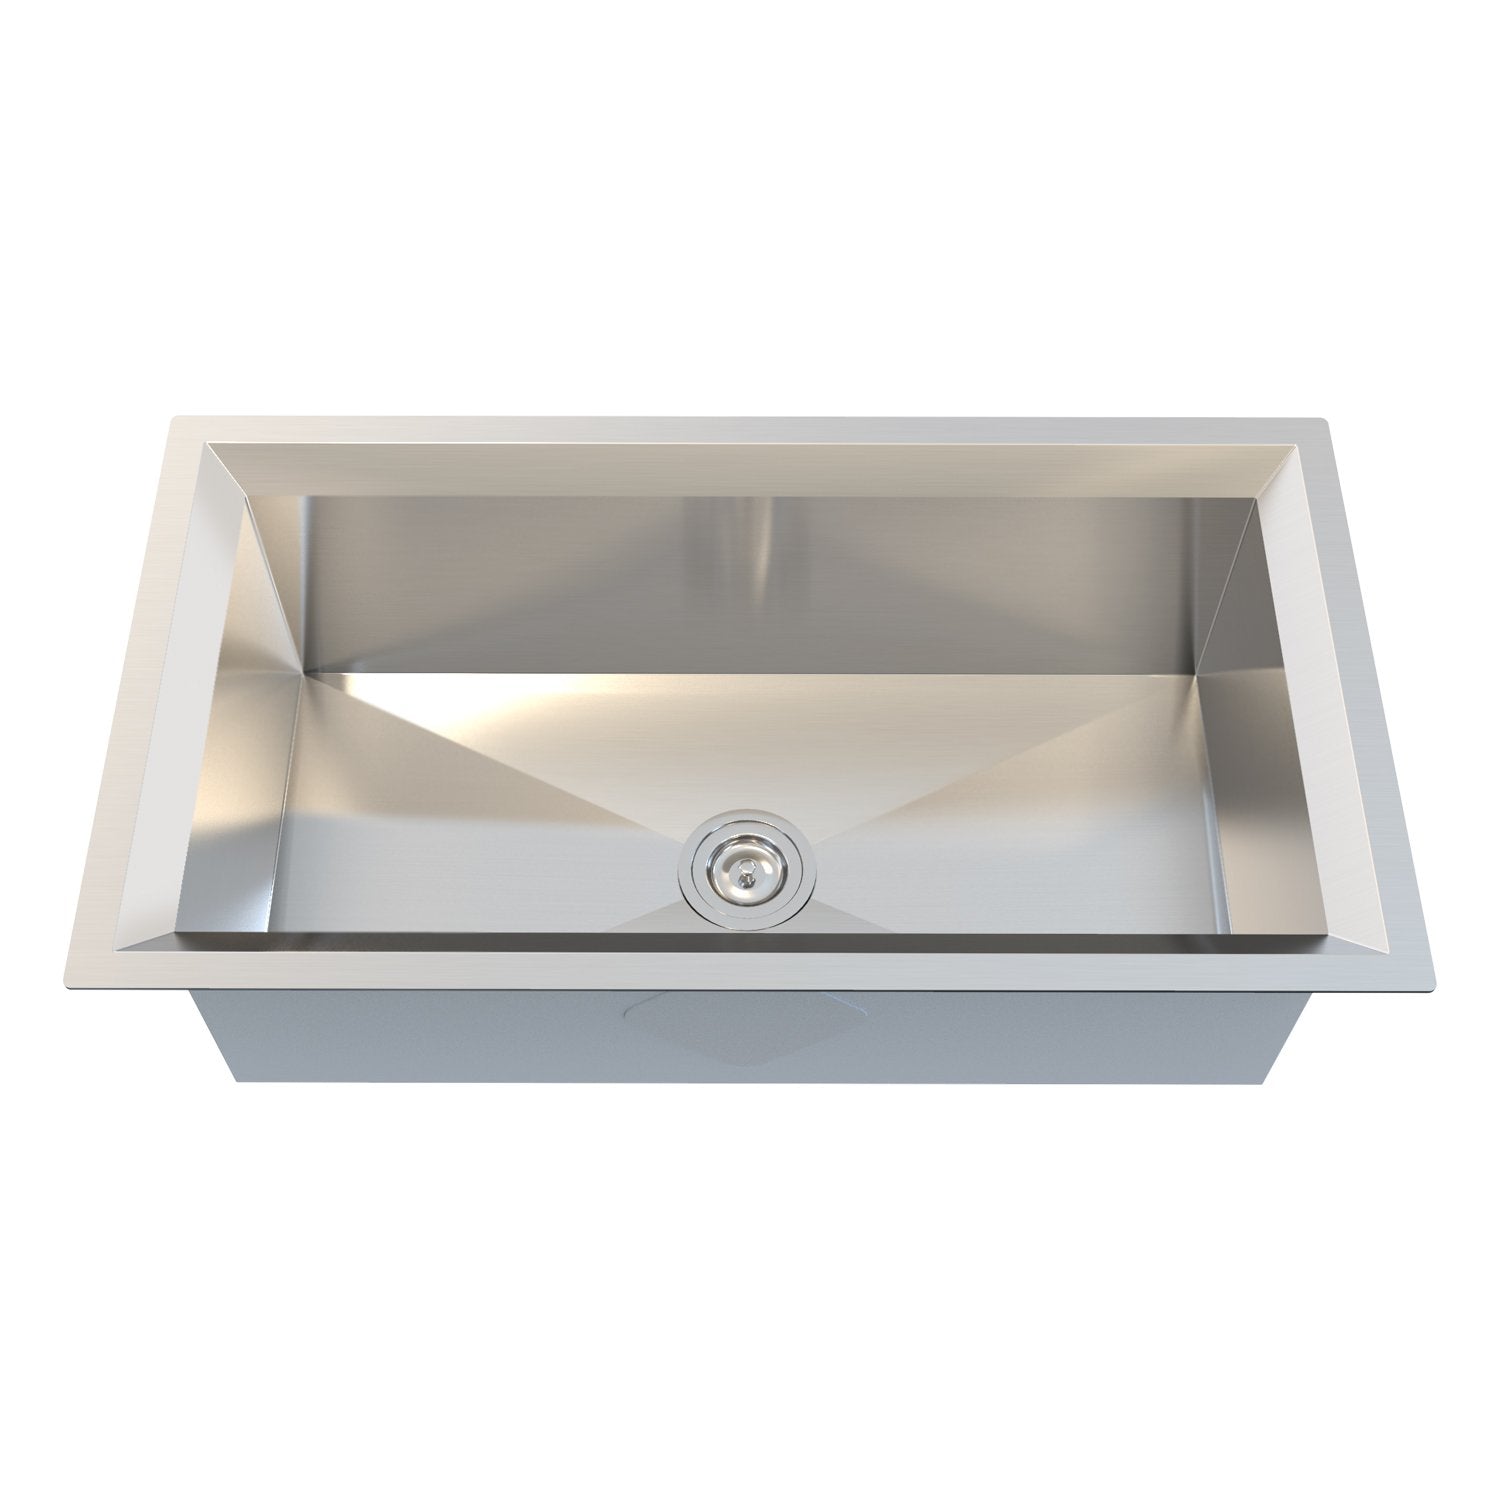 DAX Single Bowl Undermount Kitchen Sink, 16 Gauge Stainless Steel, Brushed Finish, 33 x 18 x 10 Inches (DAX-SQ-3318-16)